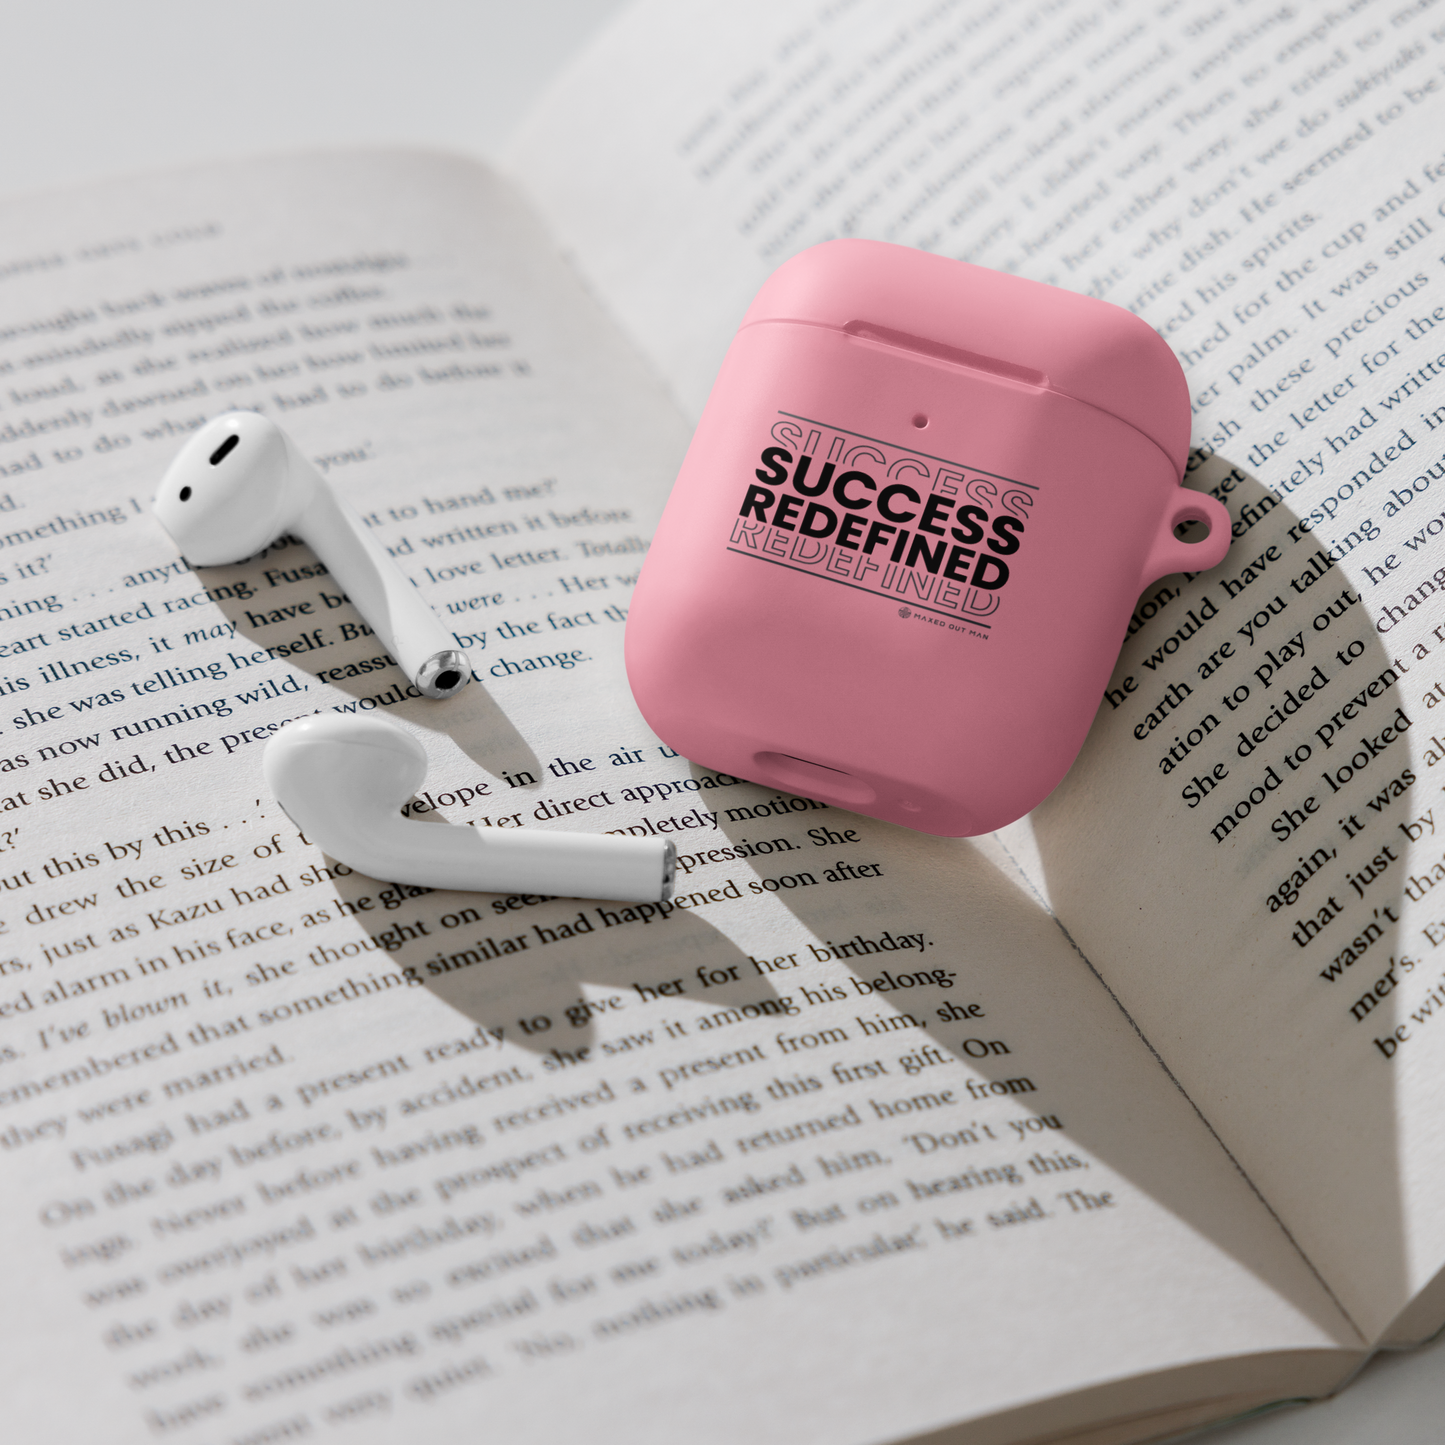 Success Redefined AirPods Case - Lighter Colors